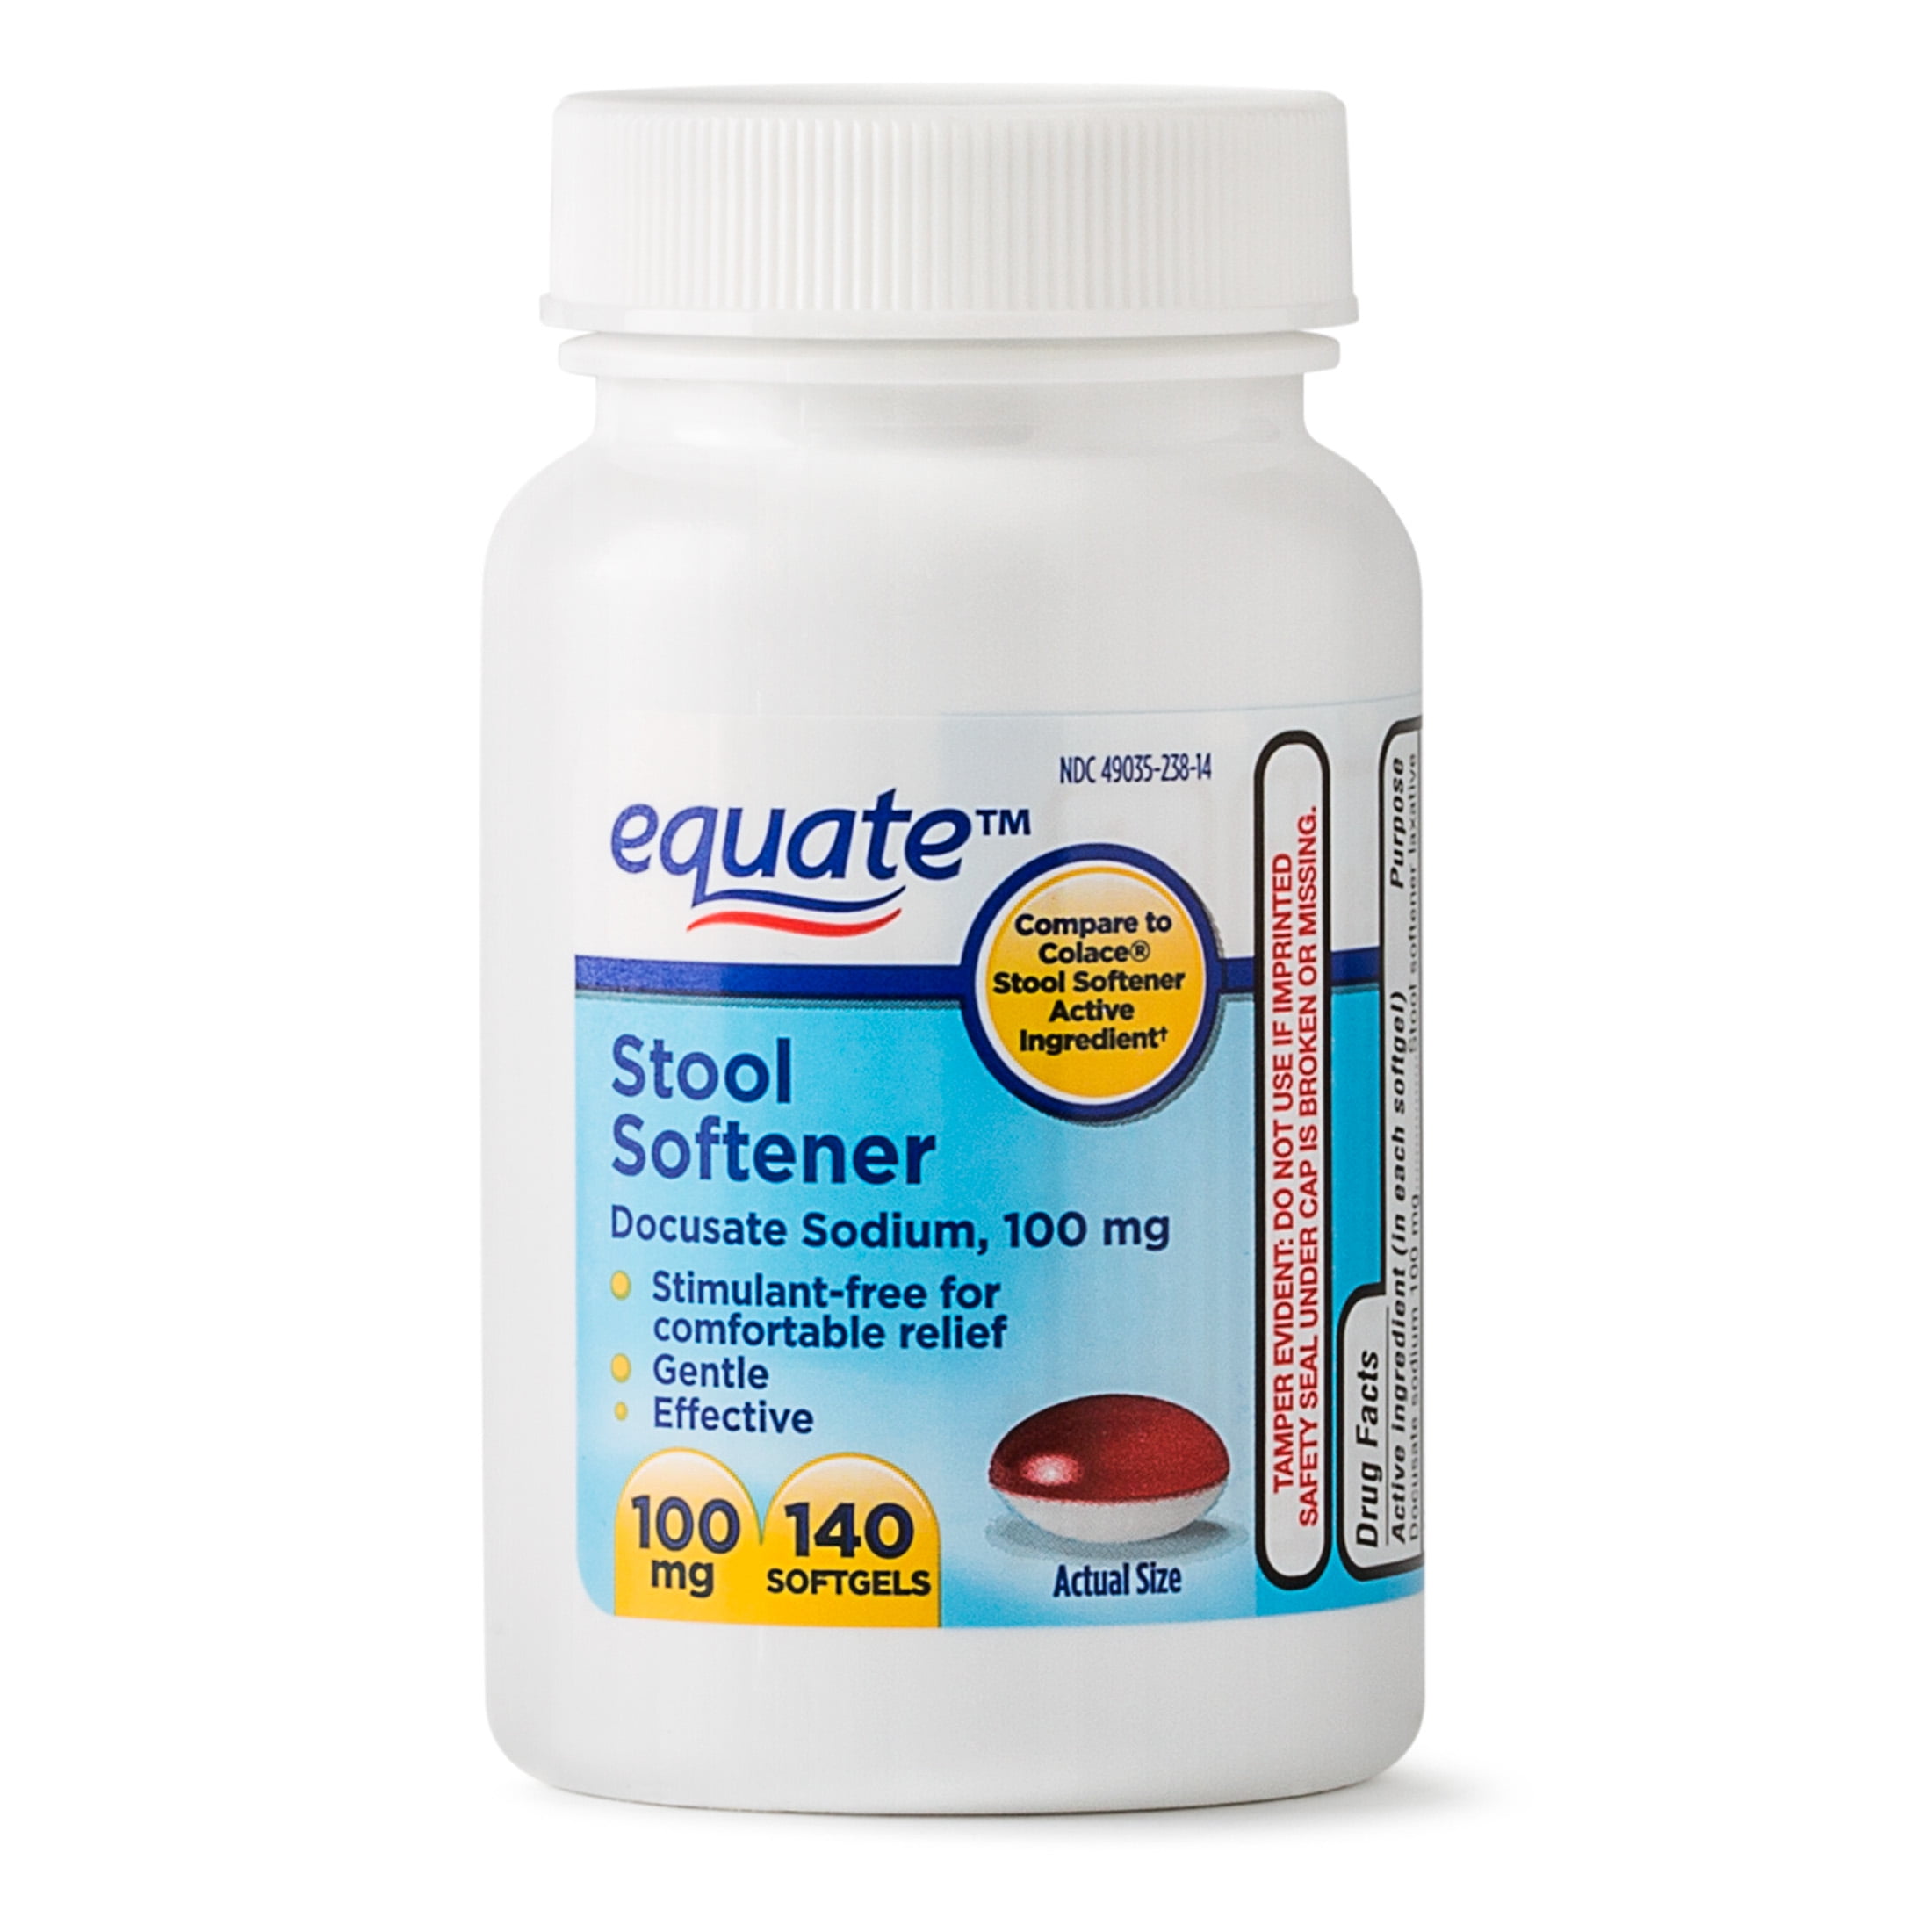 Equate Stool Softener During Pregnancy